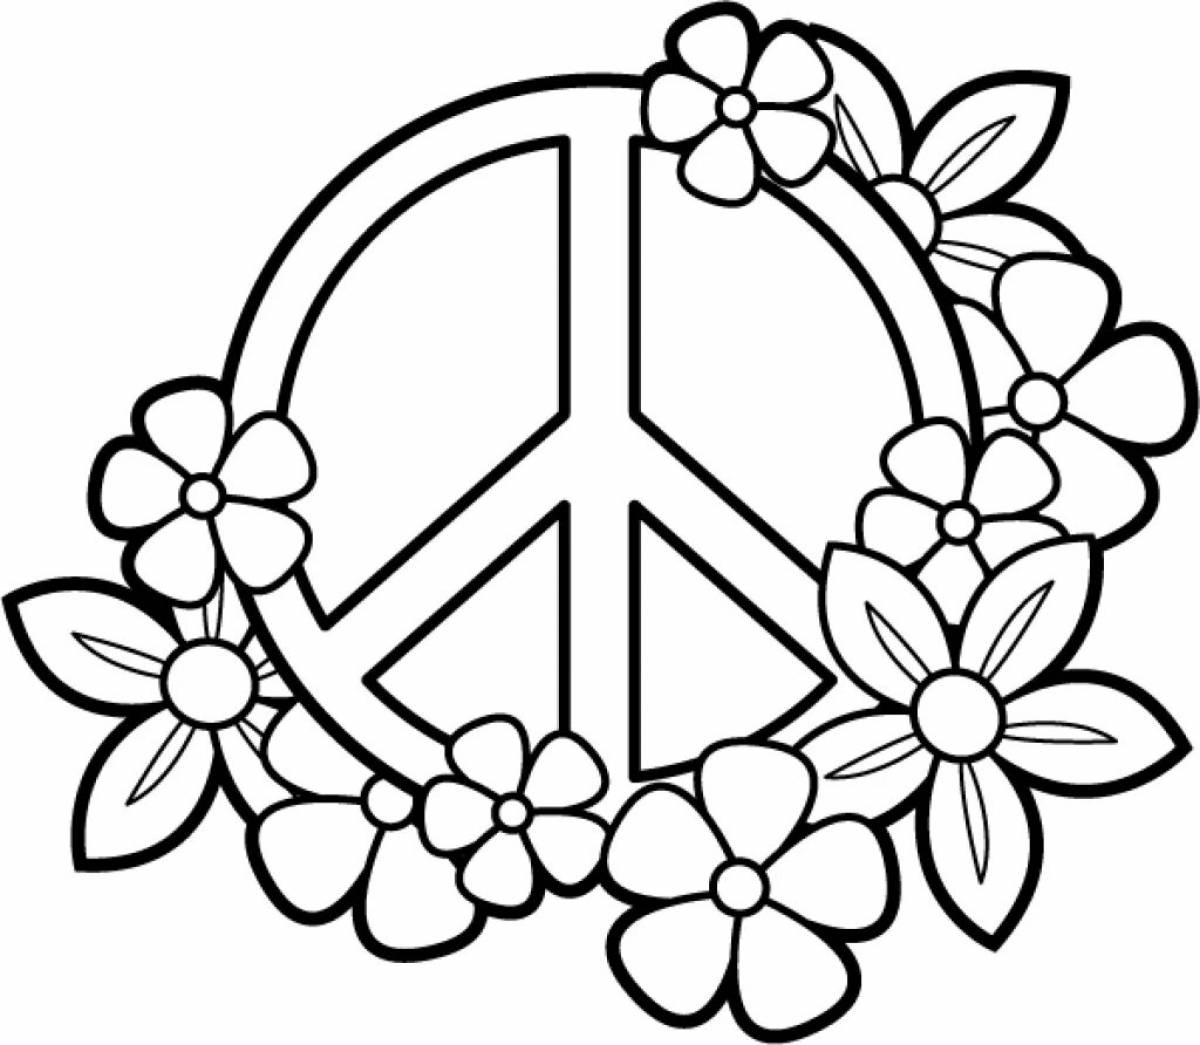 Hippie live coloring page